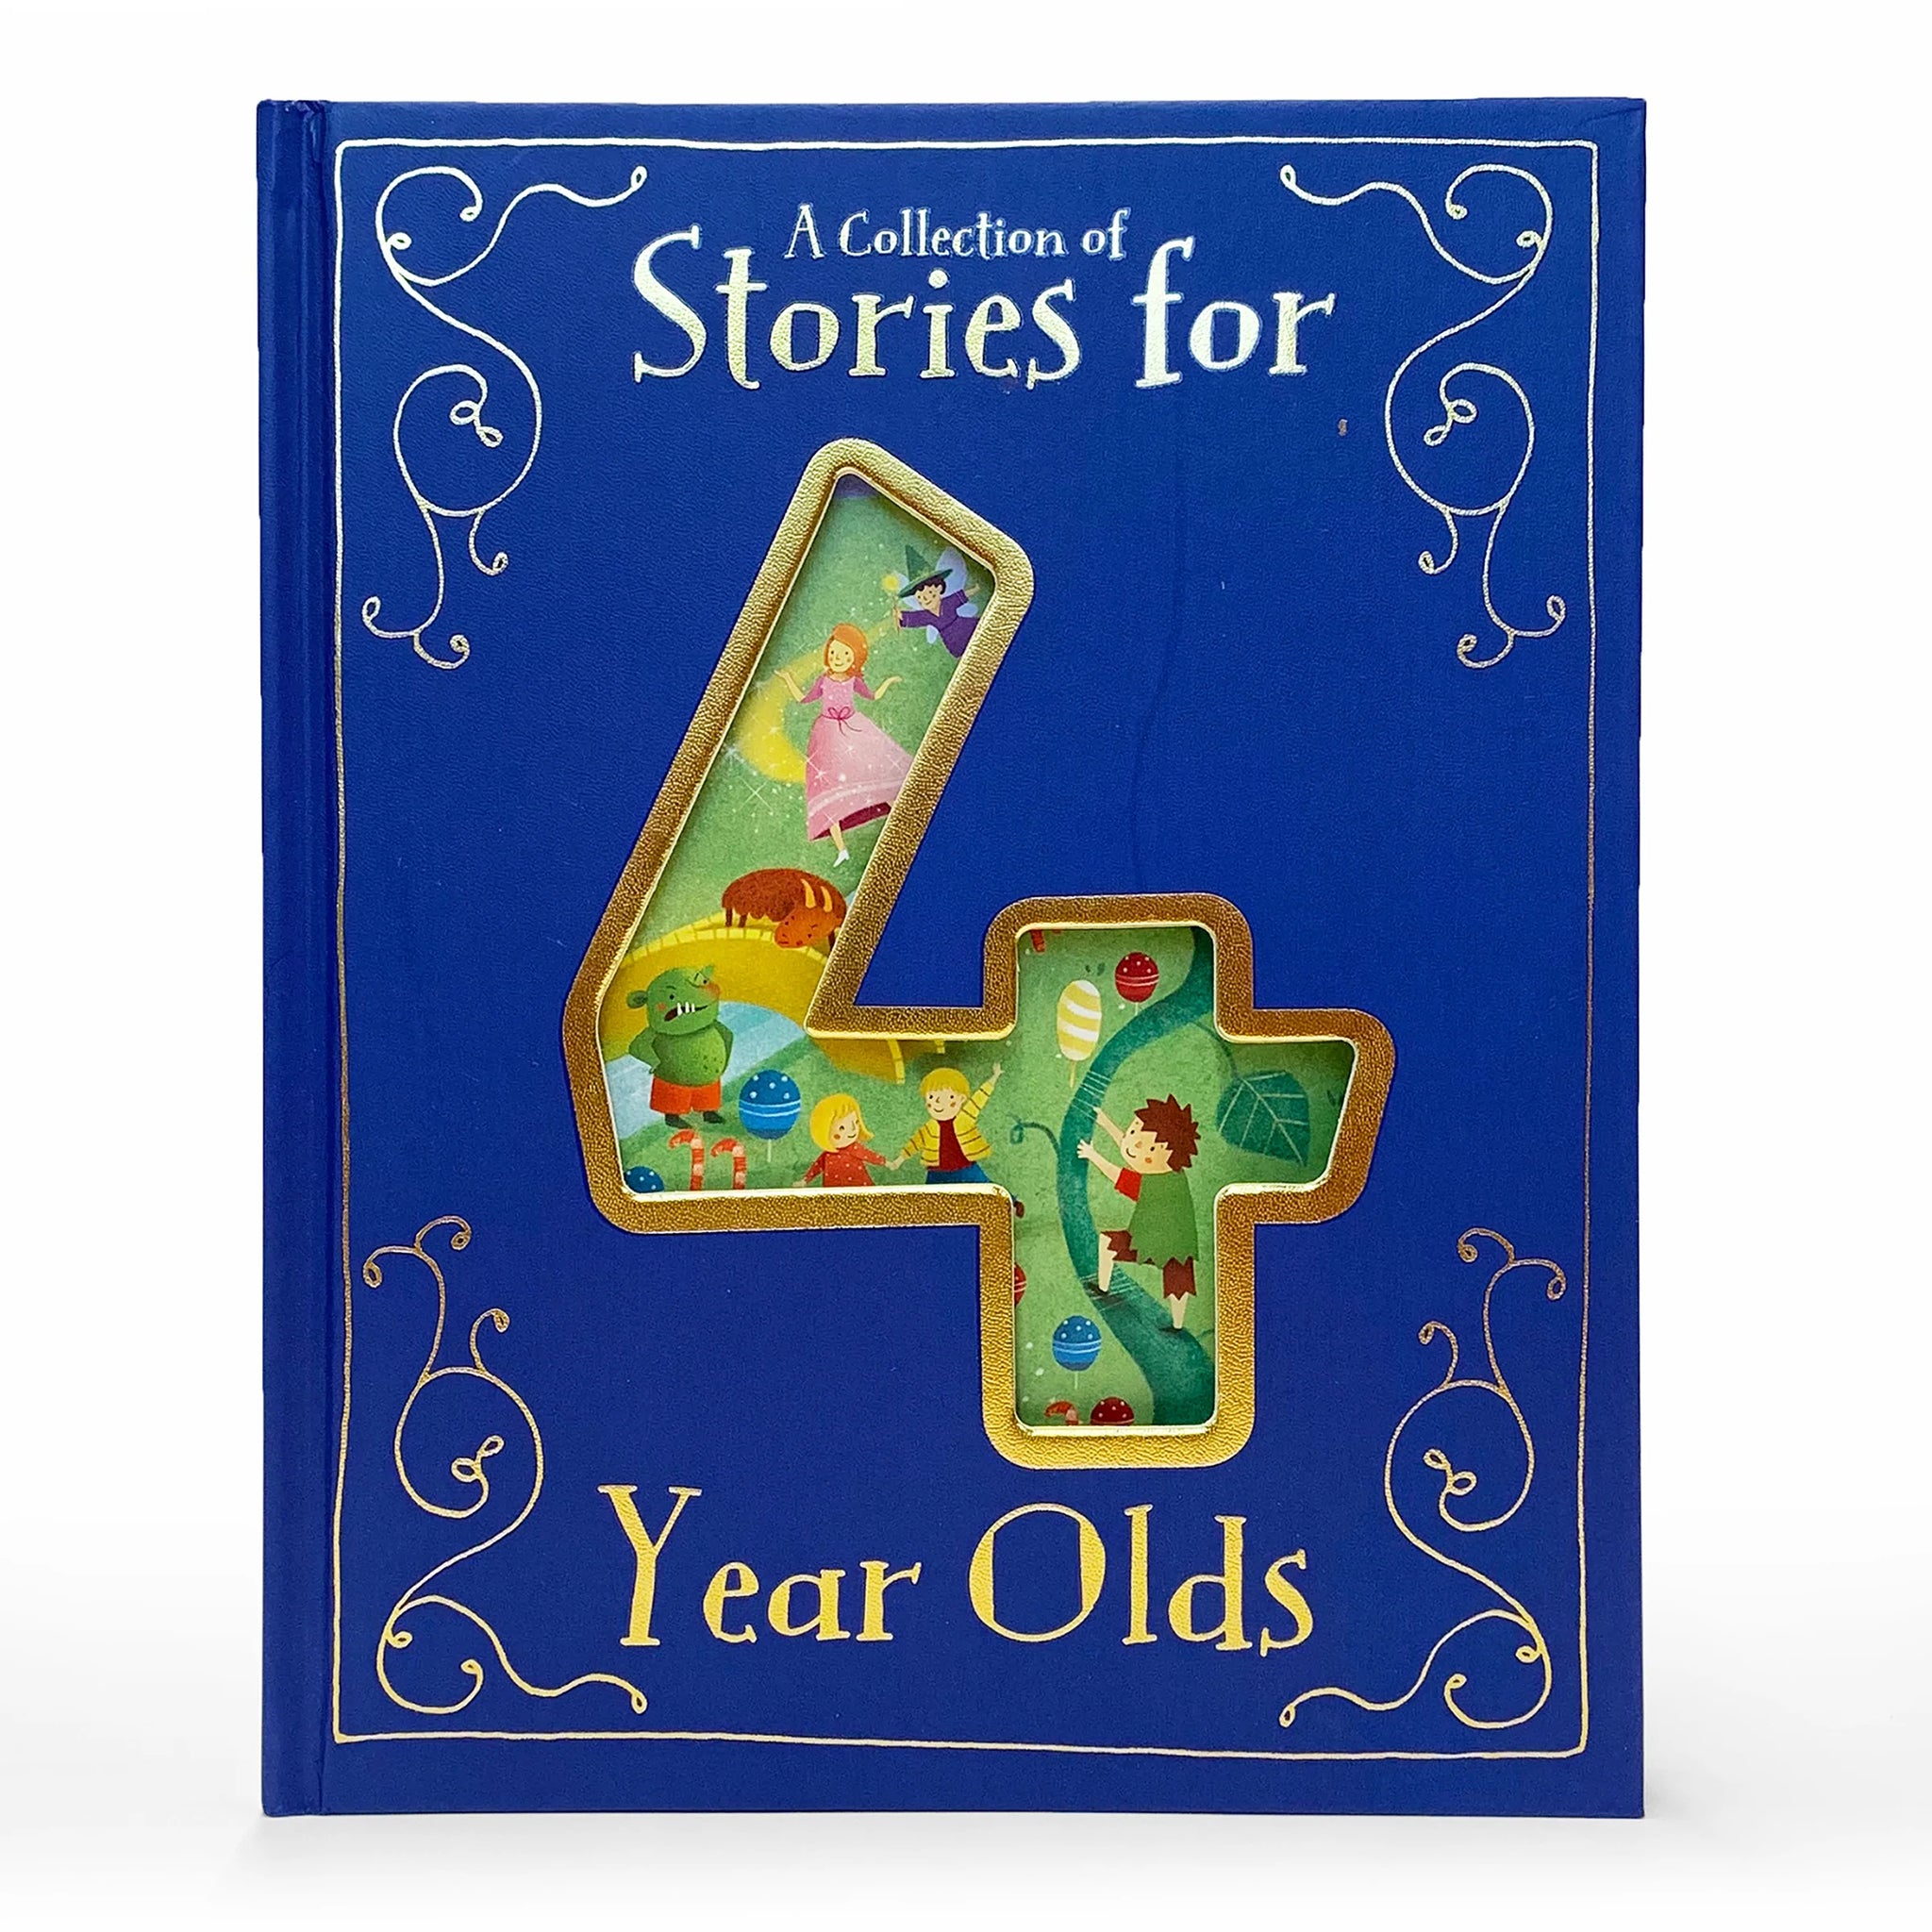 A Collection of Stories for 4-Year-Olds